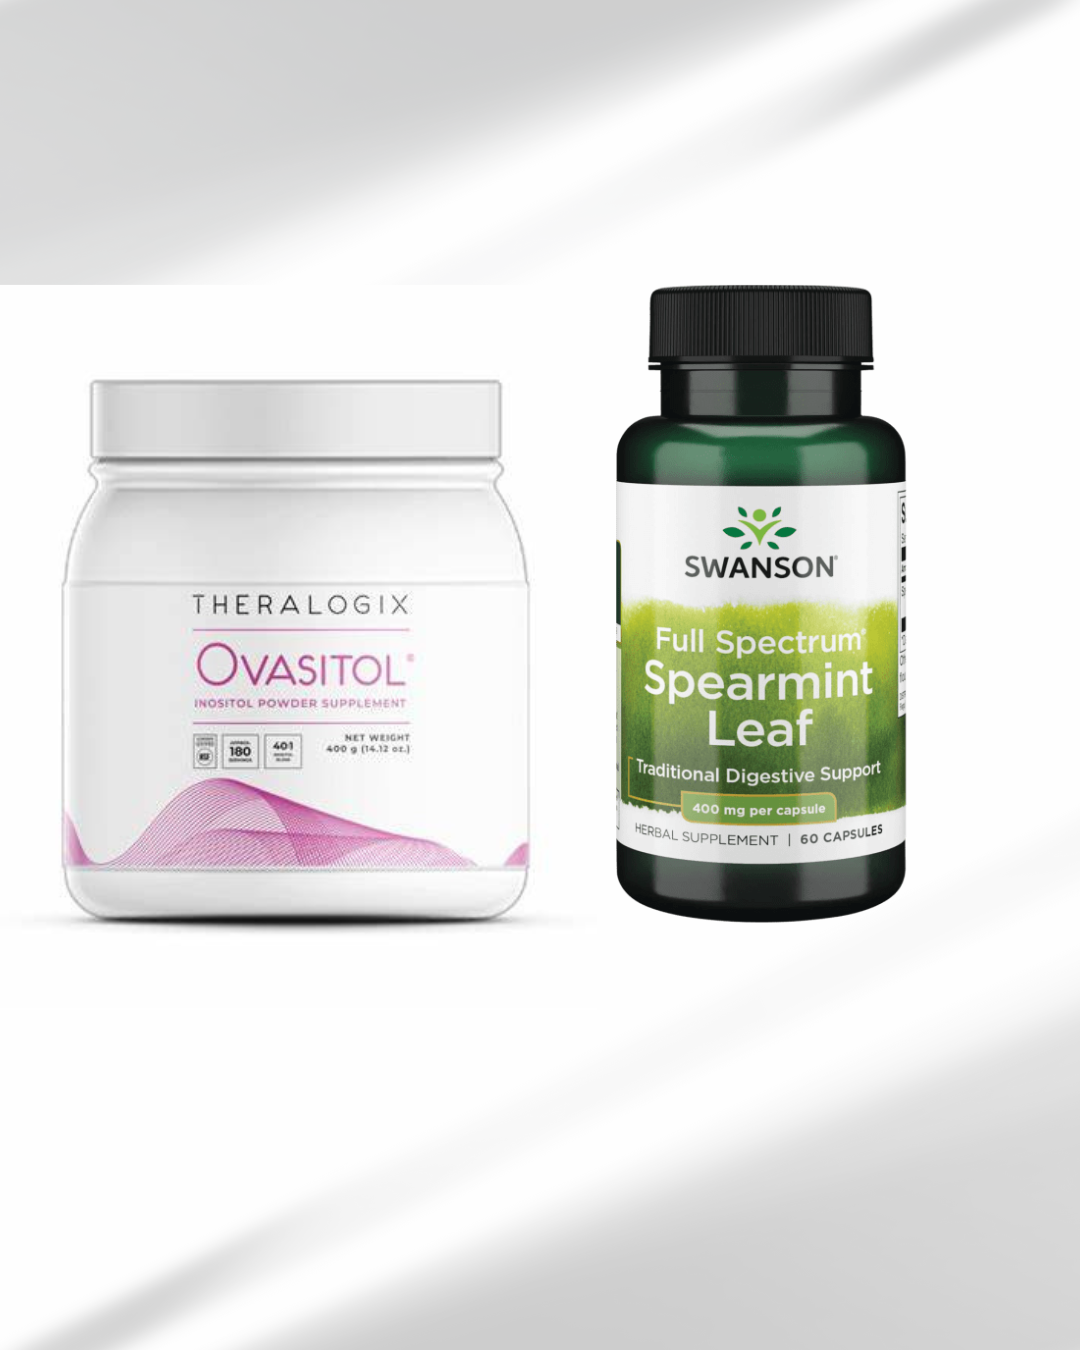 Ovasitol canister and Spearmint Leaf Bundle